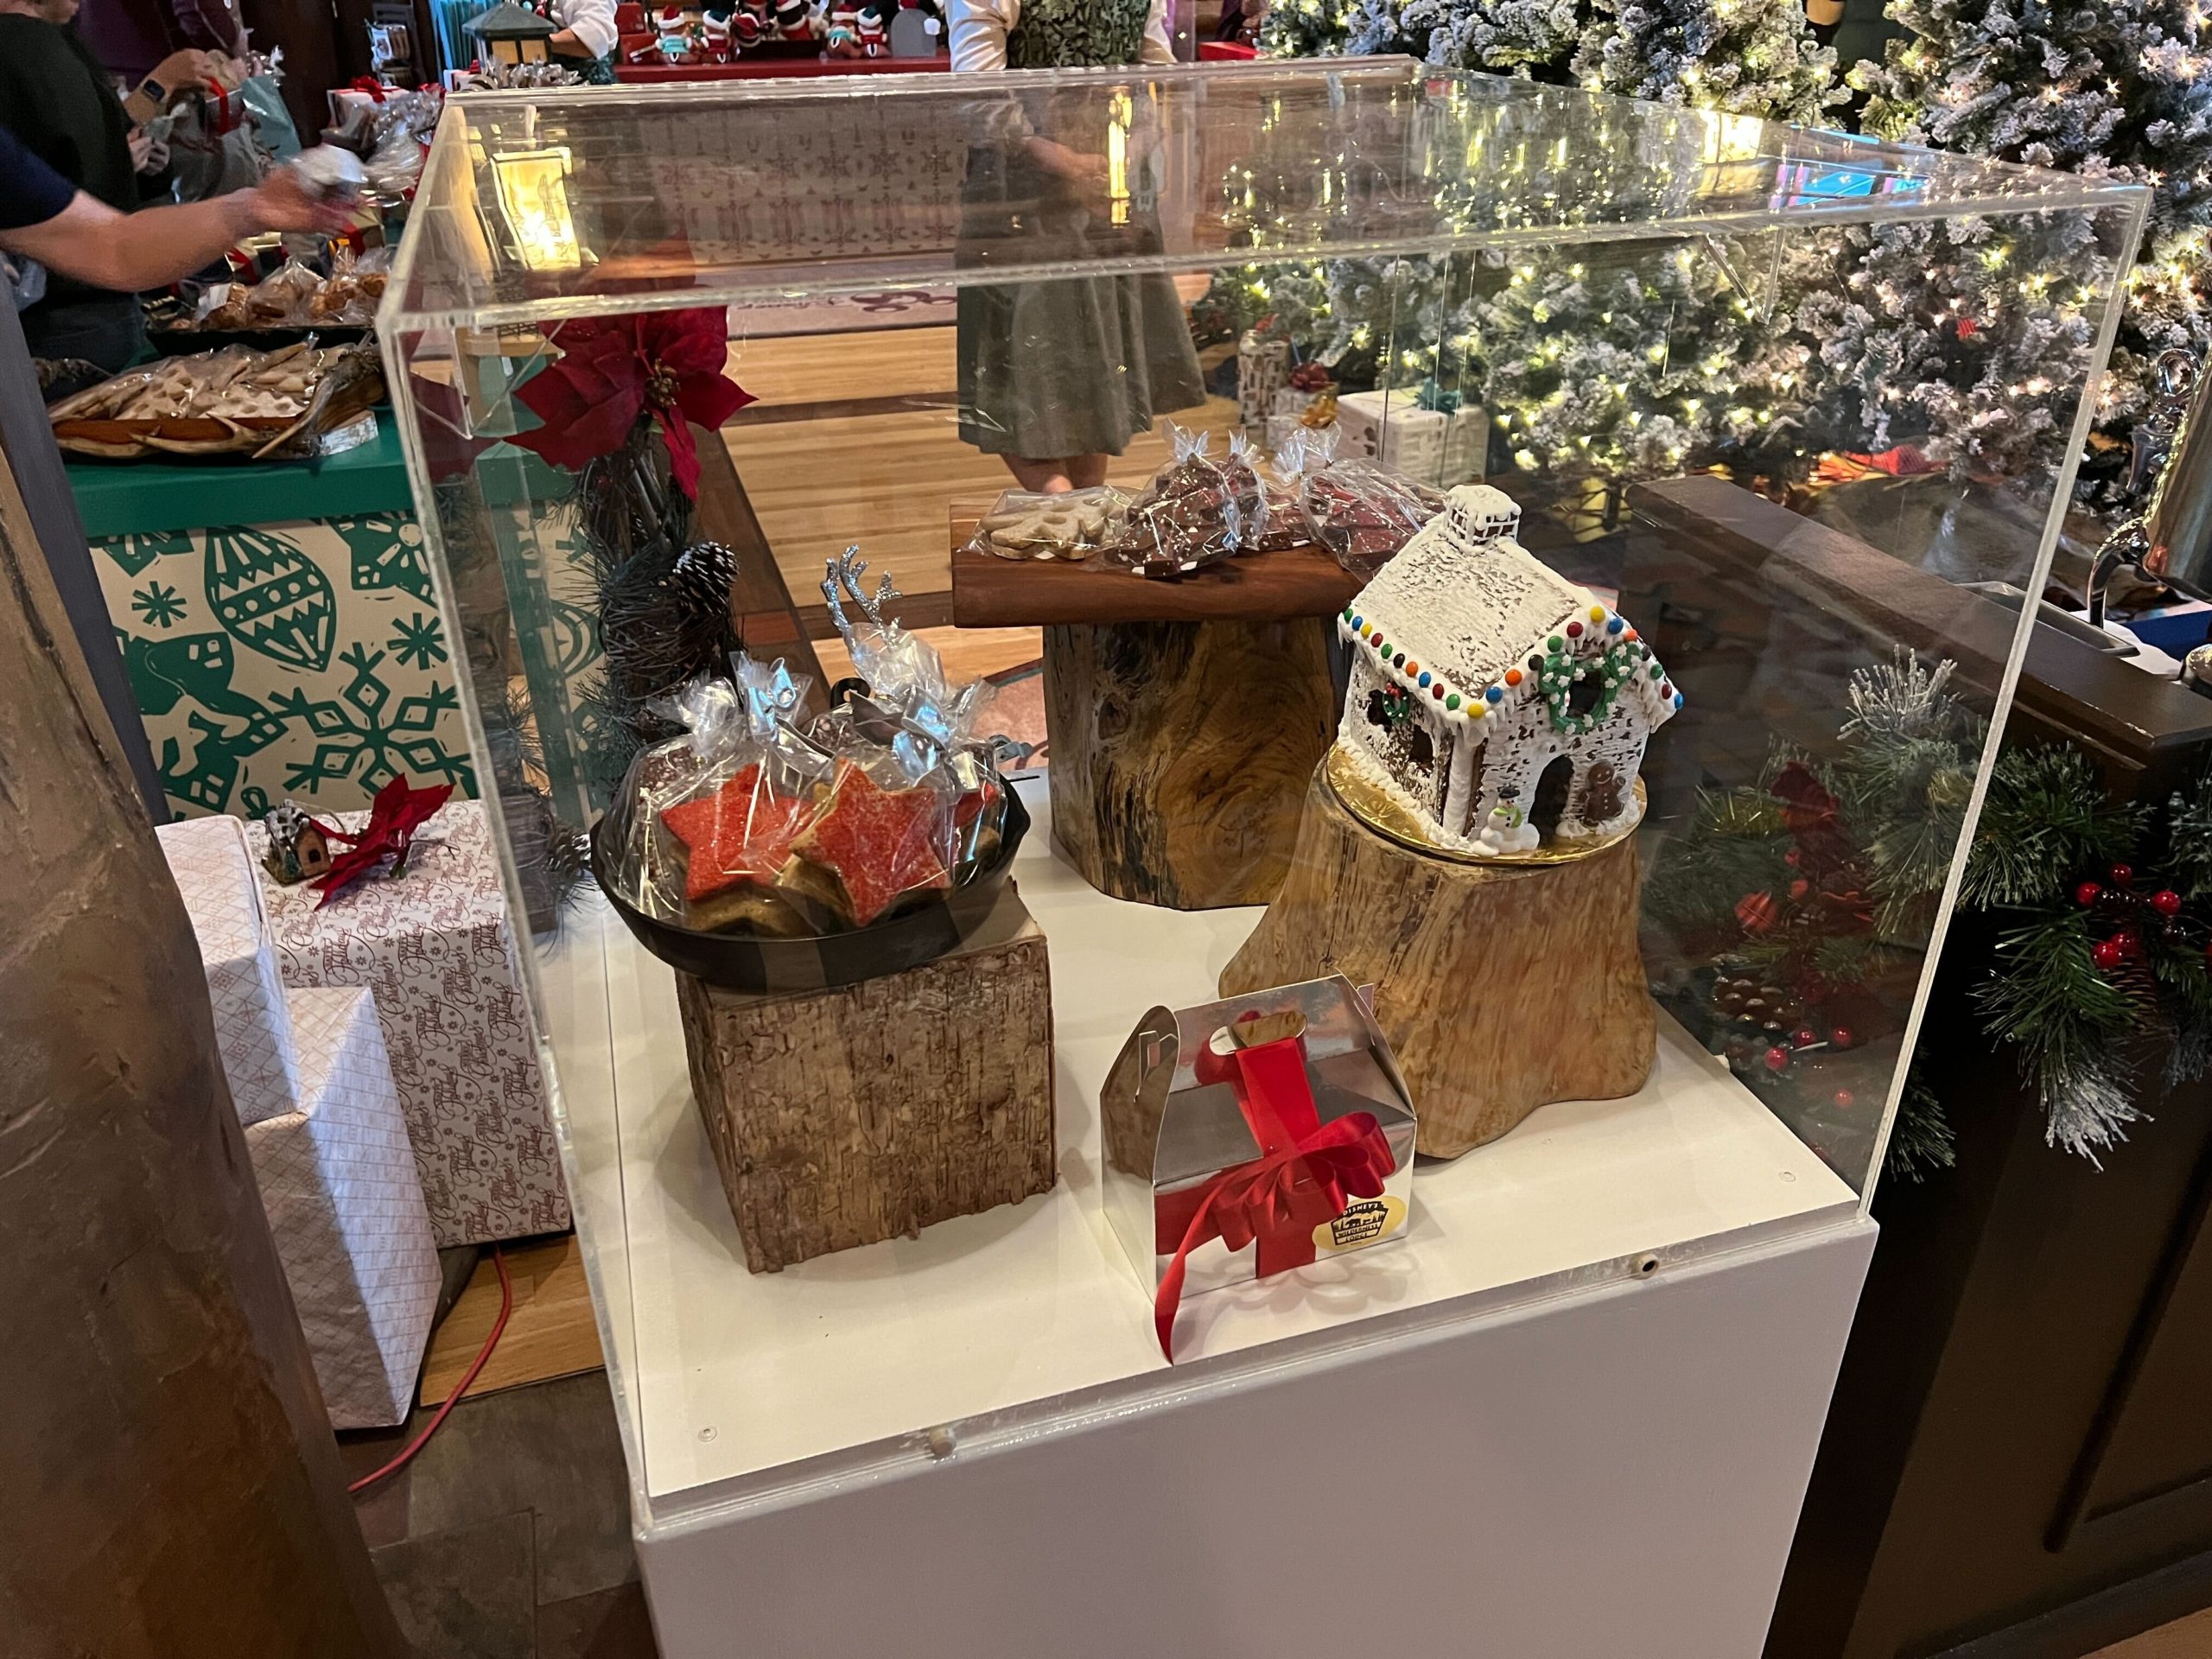 wilderness lodge holiday treat stand